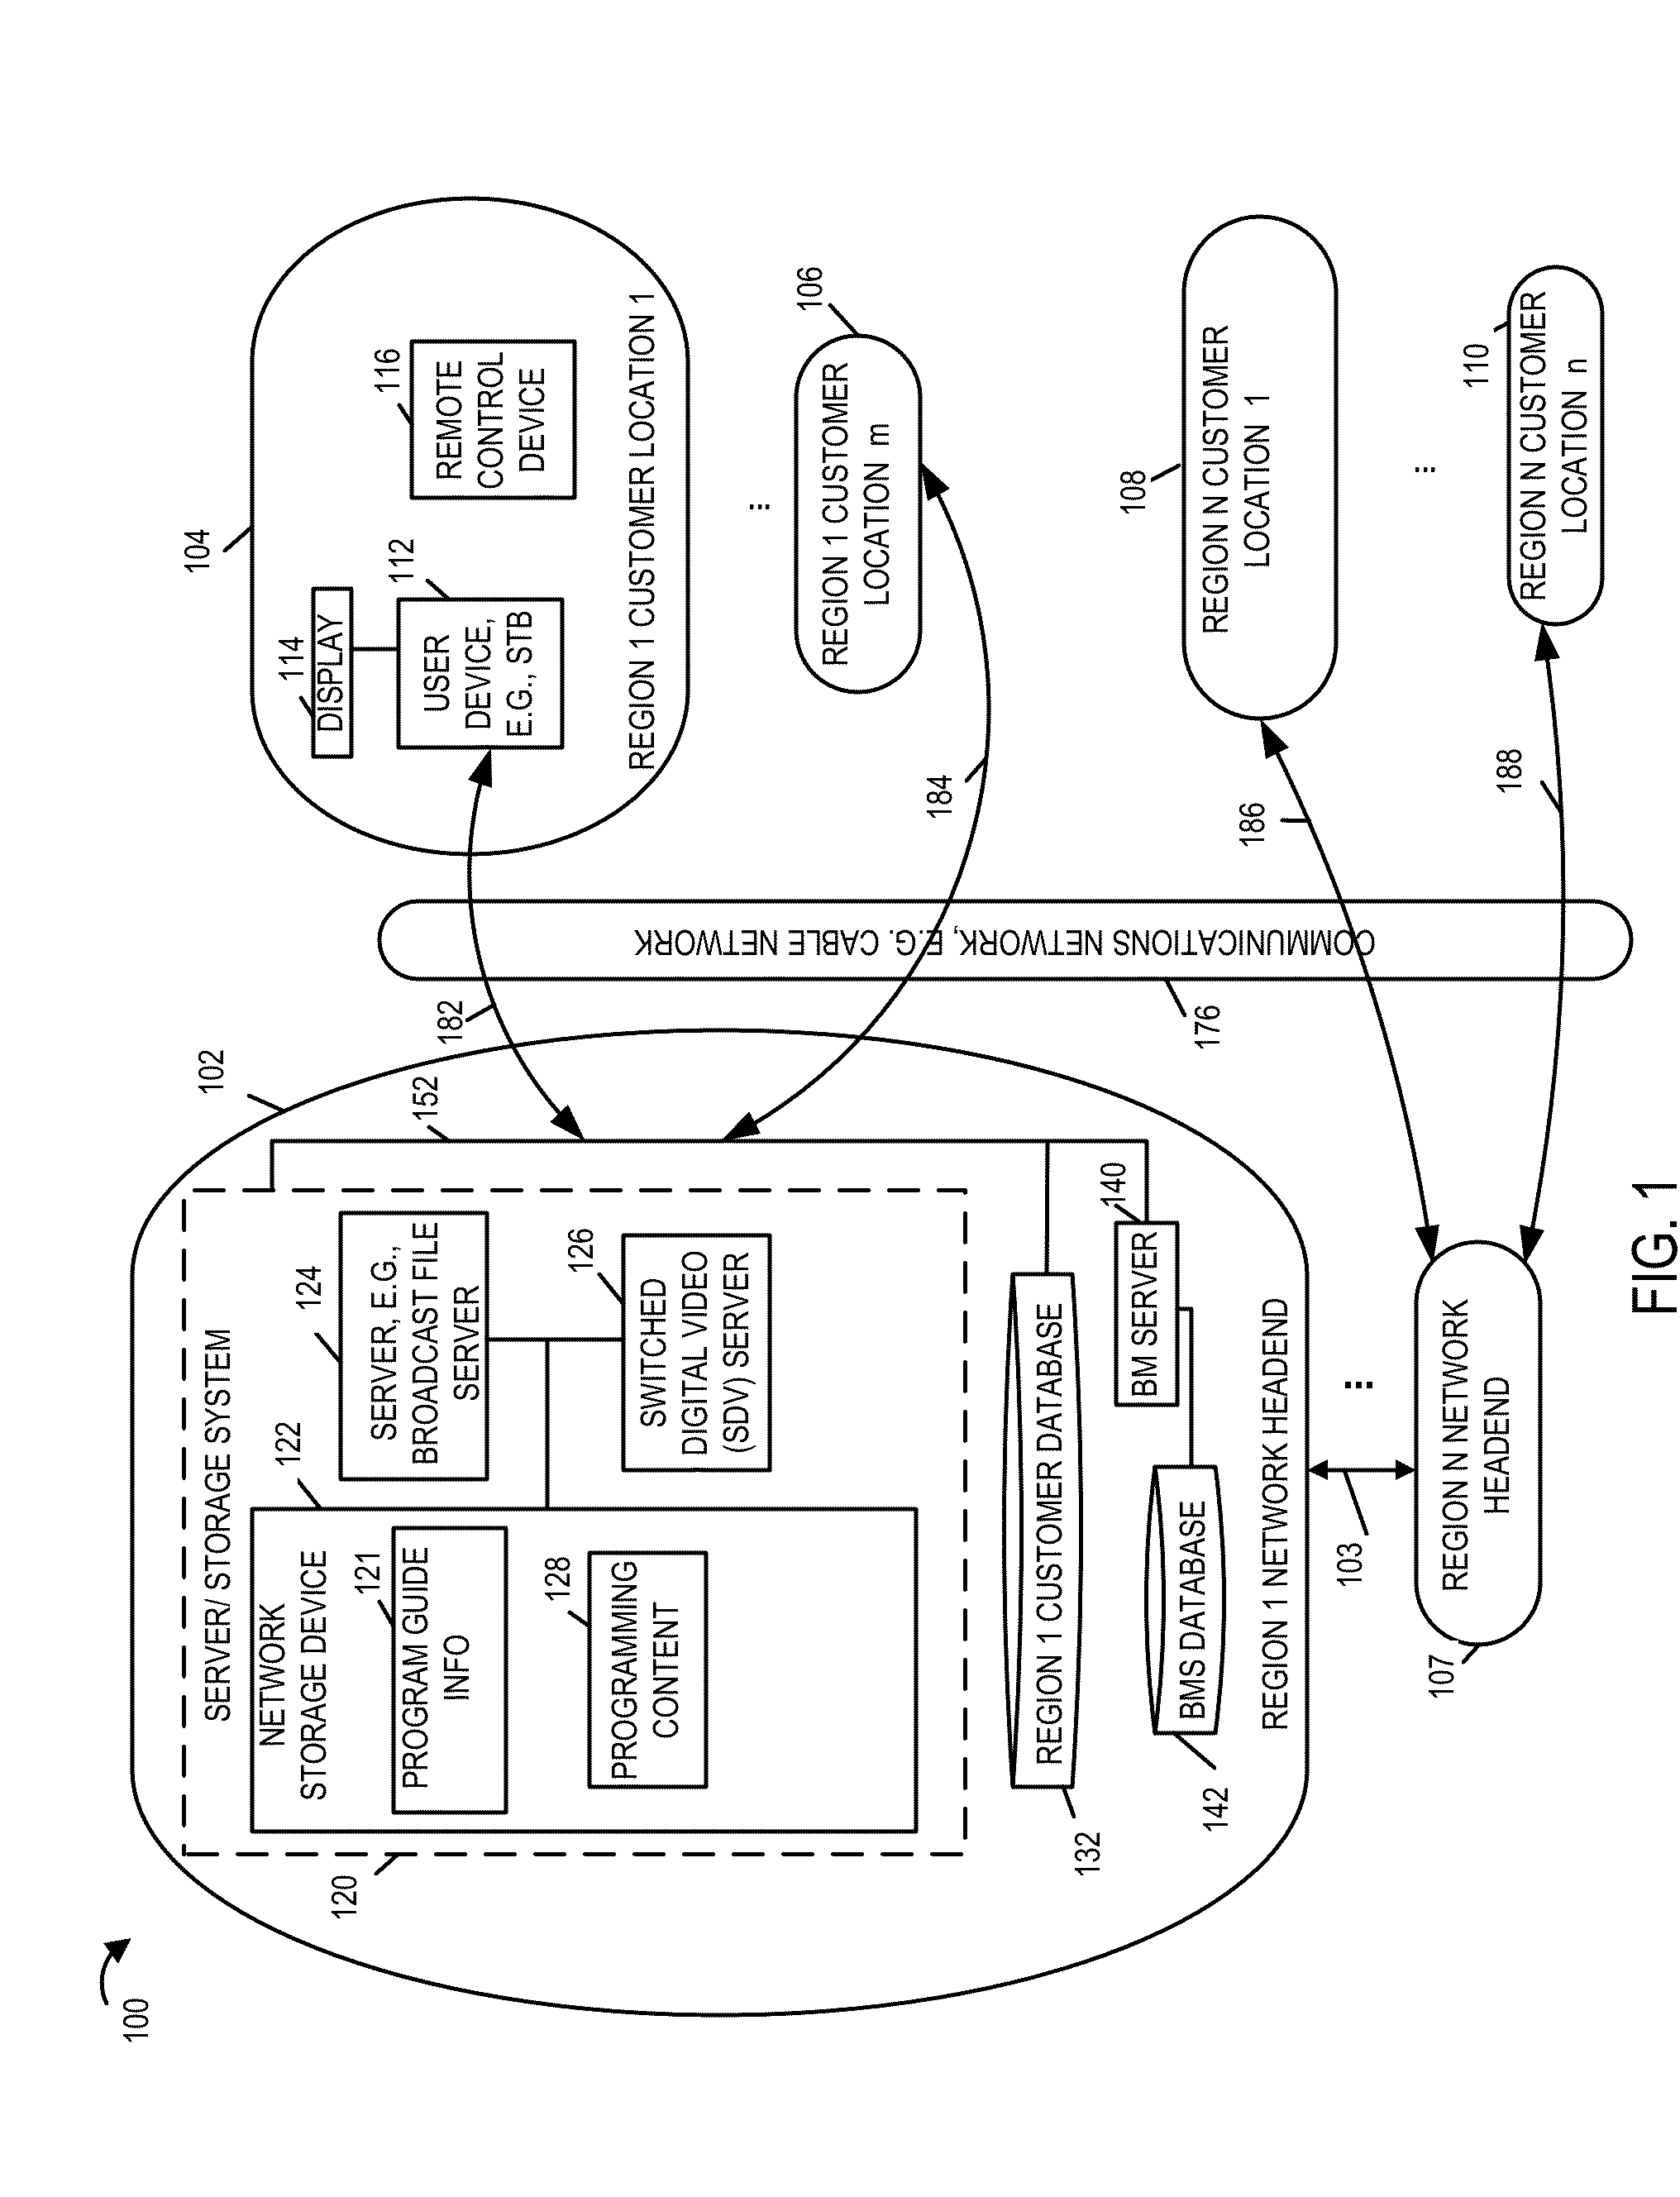 Methods and apparatus that support easy access and browsing of program and channel listings in a program guide